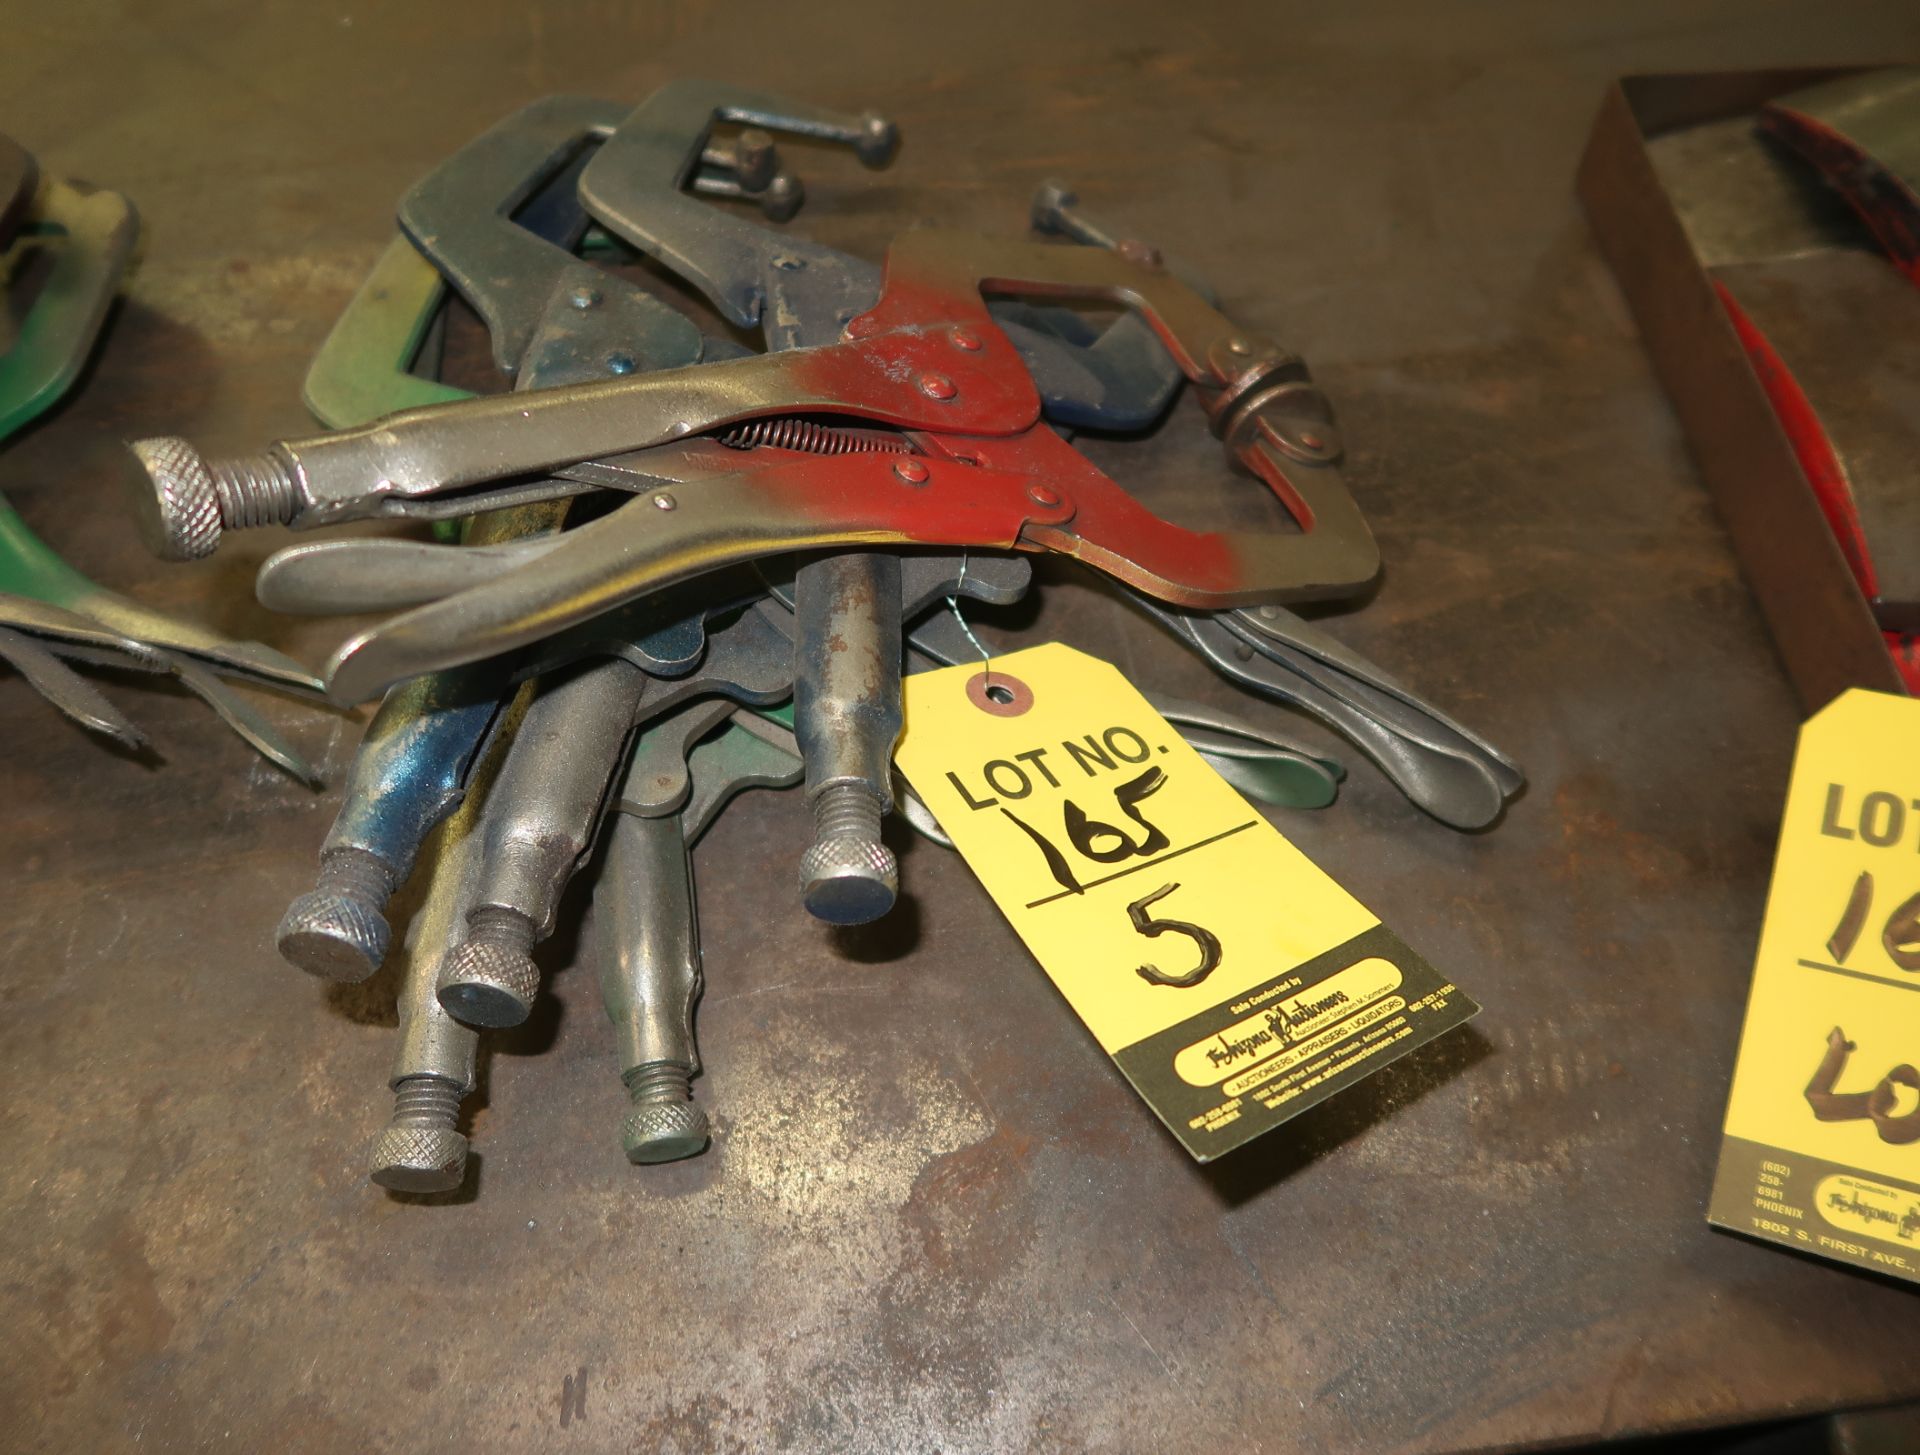 PITTSBURGH VISE CLAMPS